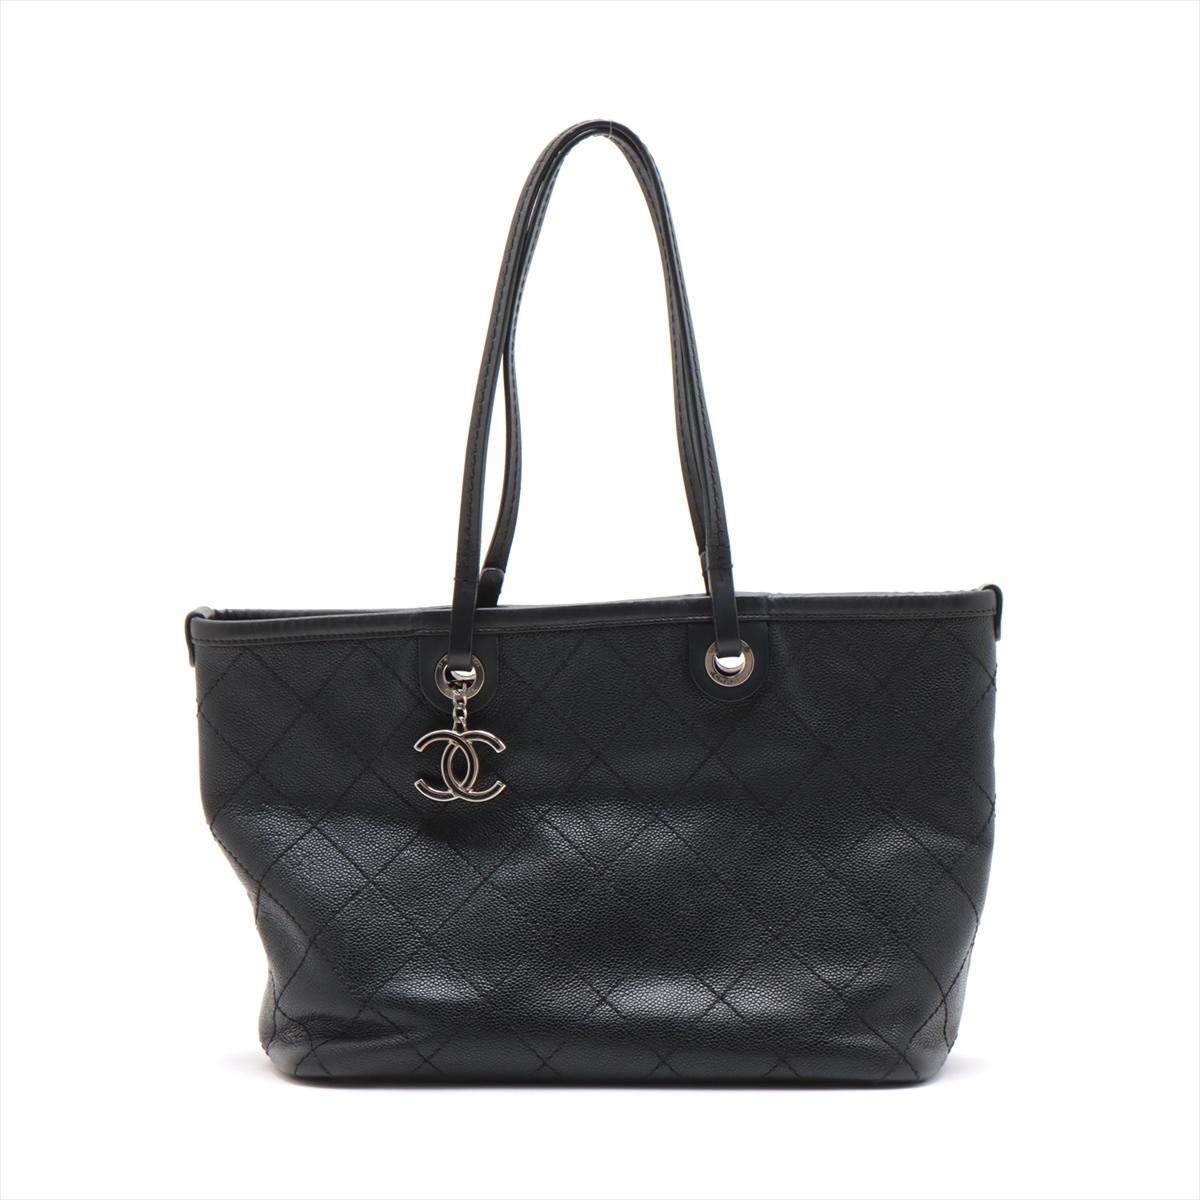 The Chanel On The Road Caviar Skin Tote Bag in Black is a sleek and versatile accessory that exudes timeless sophistication. Crafted from luxurious caviar skin leather, the bag boasts a refined texture and durability. The quilted detailing on the